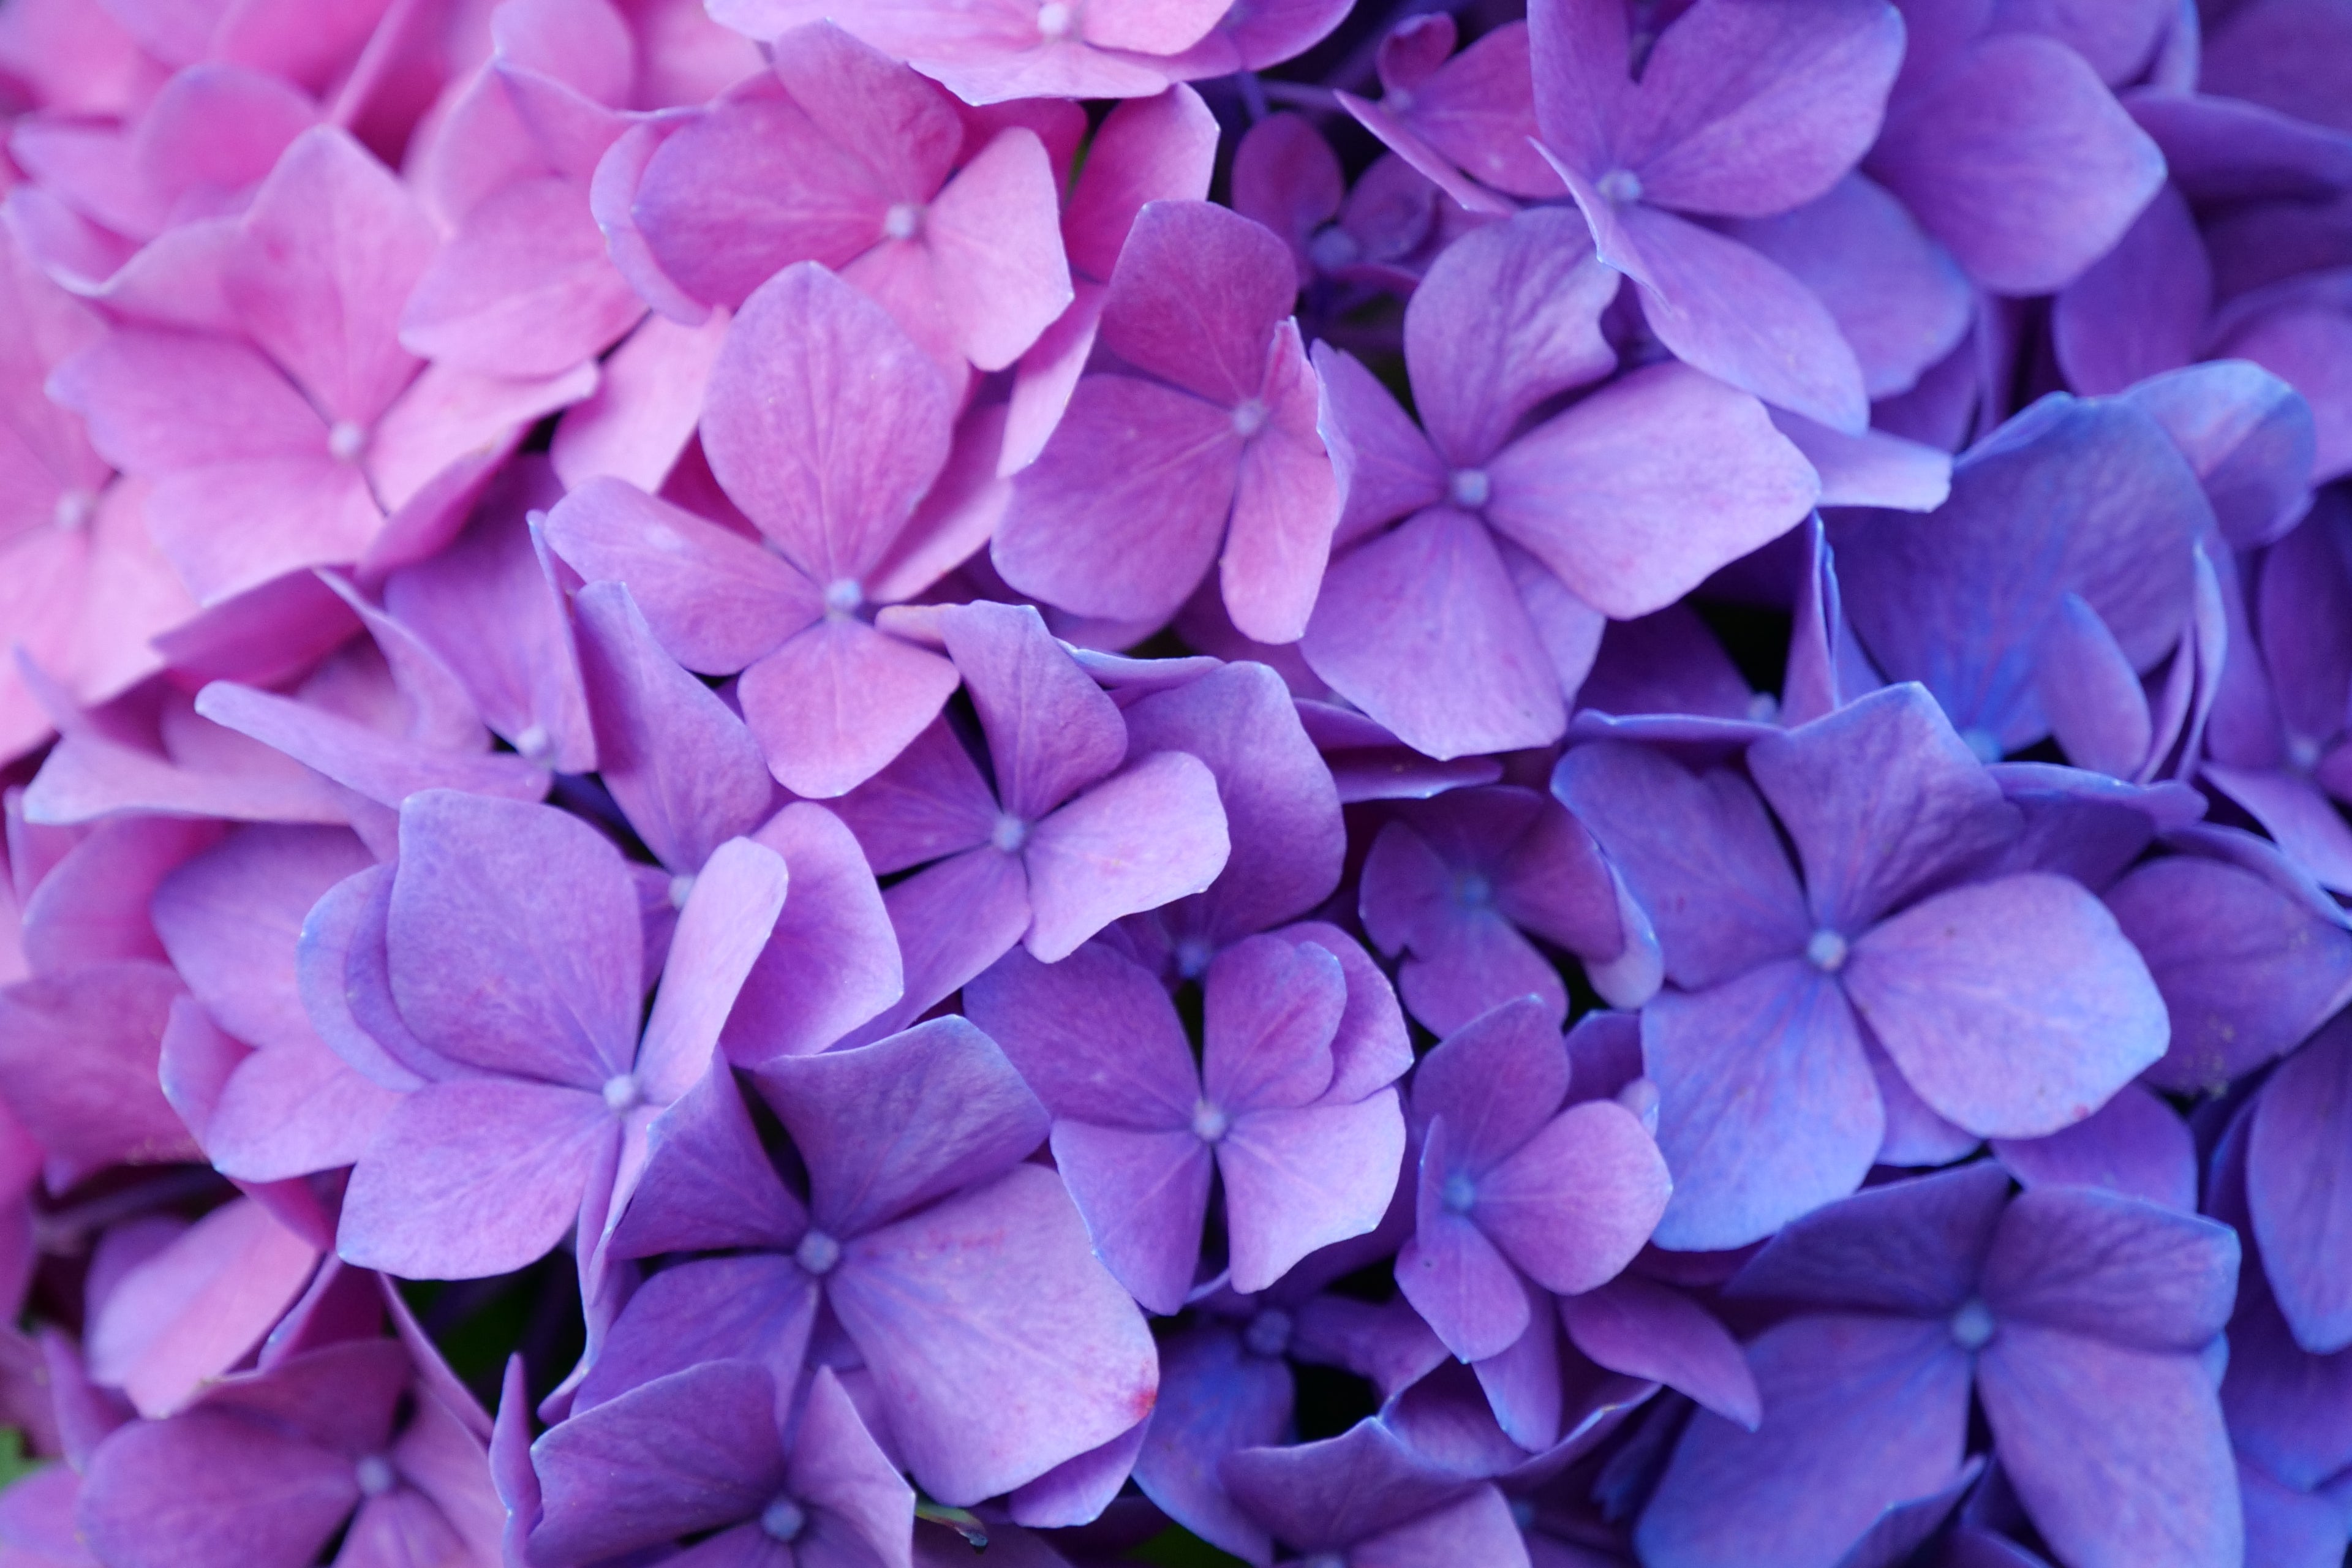 Can vinegar change the color of hydrangeas?